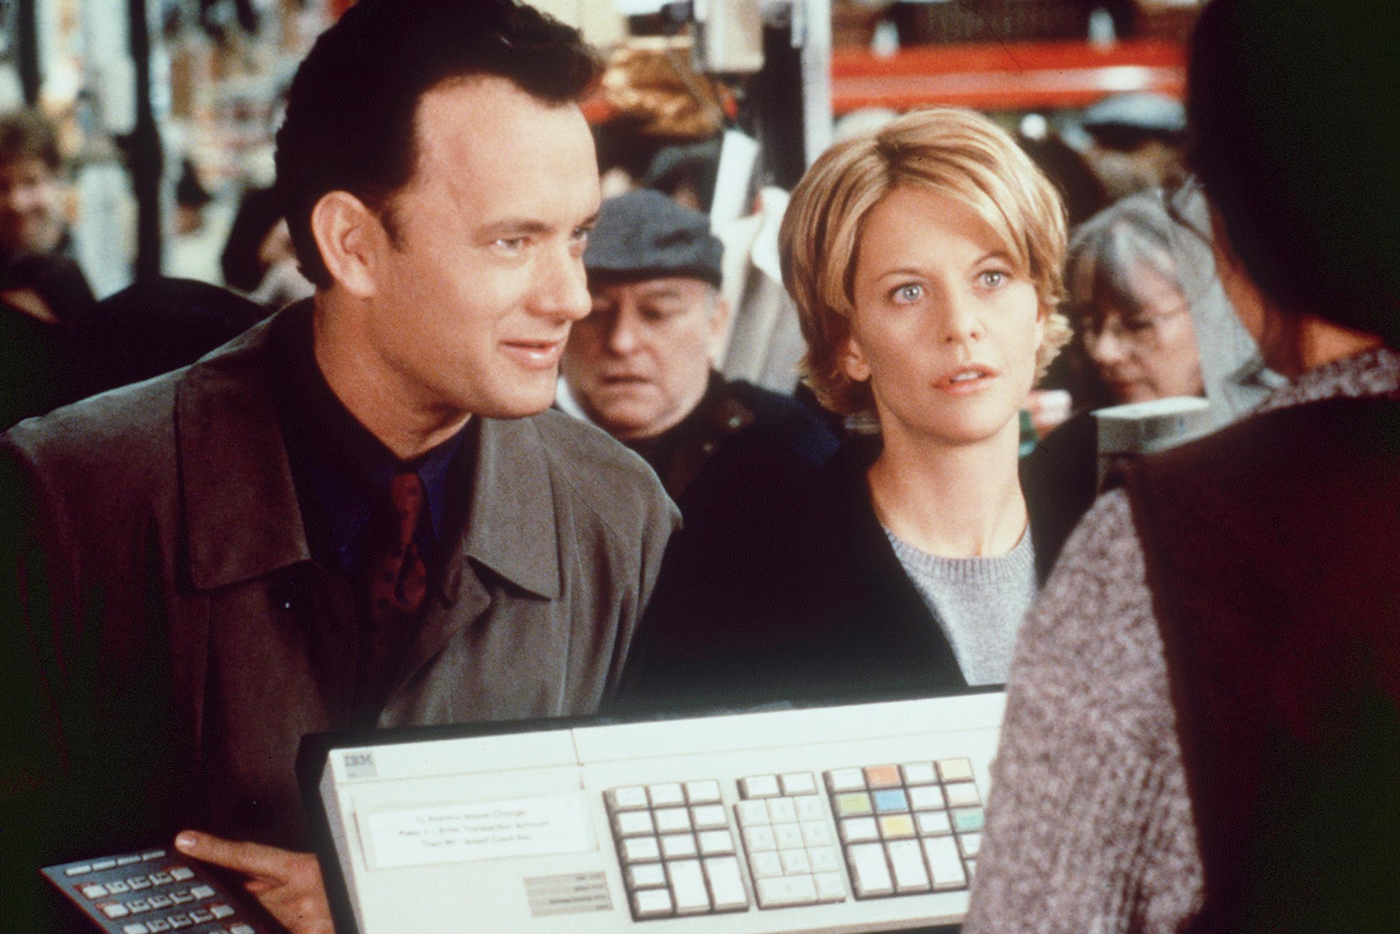 P.S. I Love Movies: Revisiting “You've Got Mail”